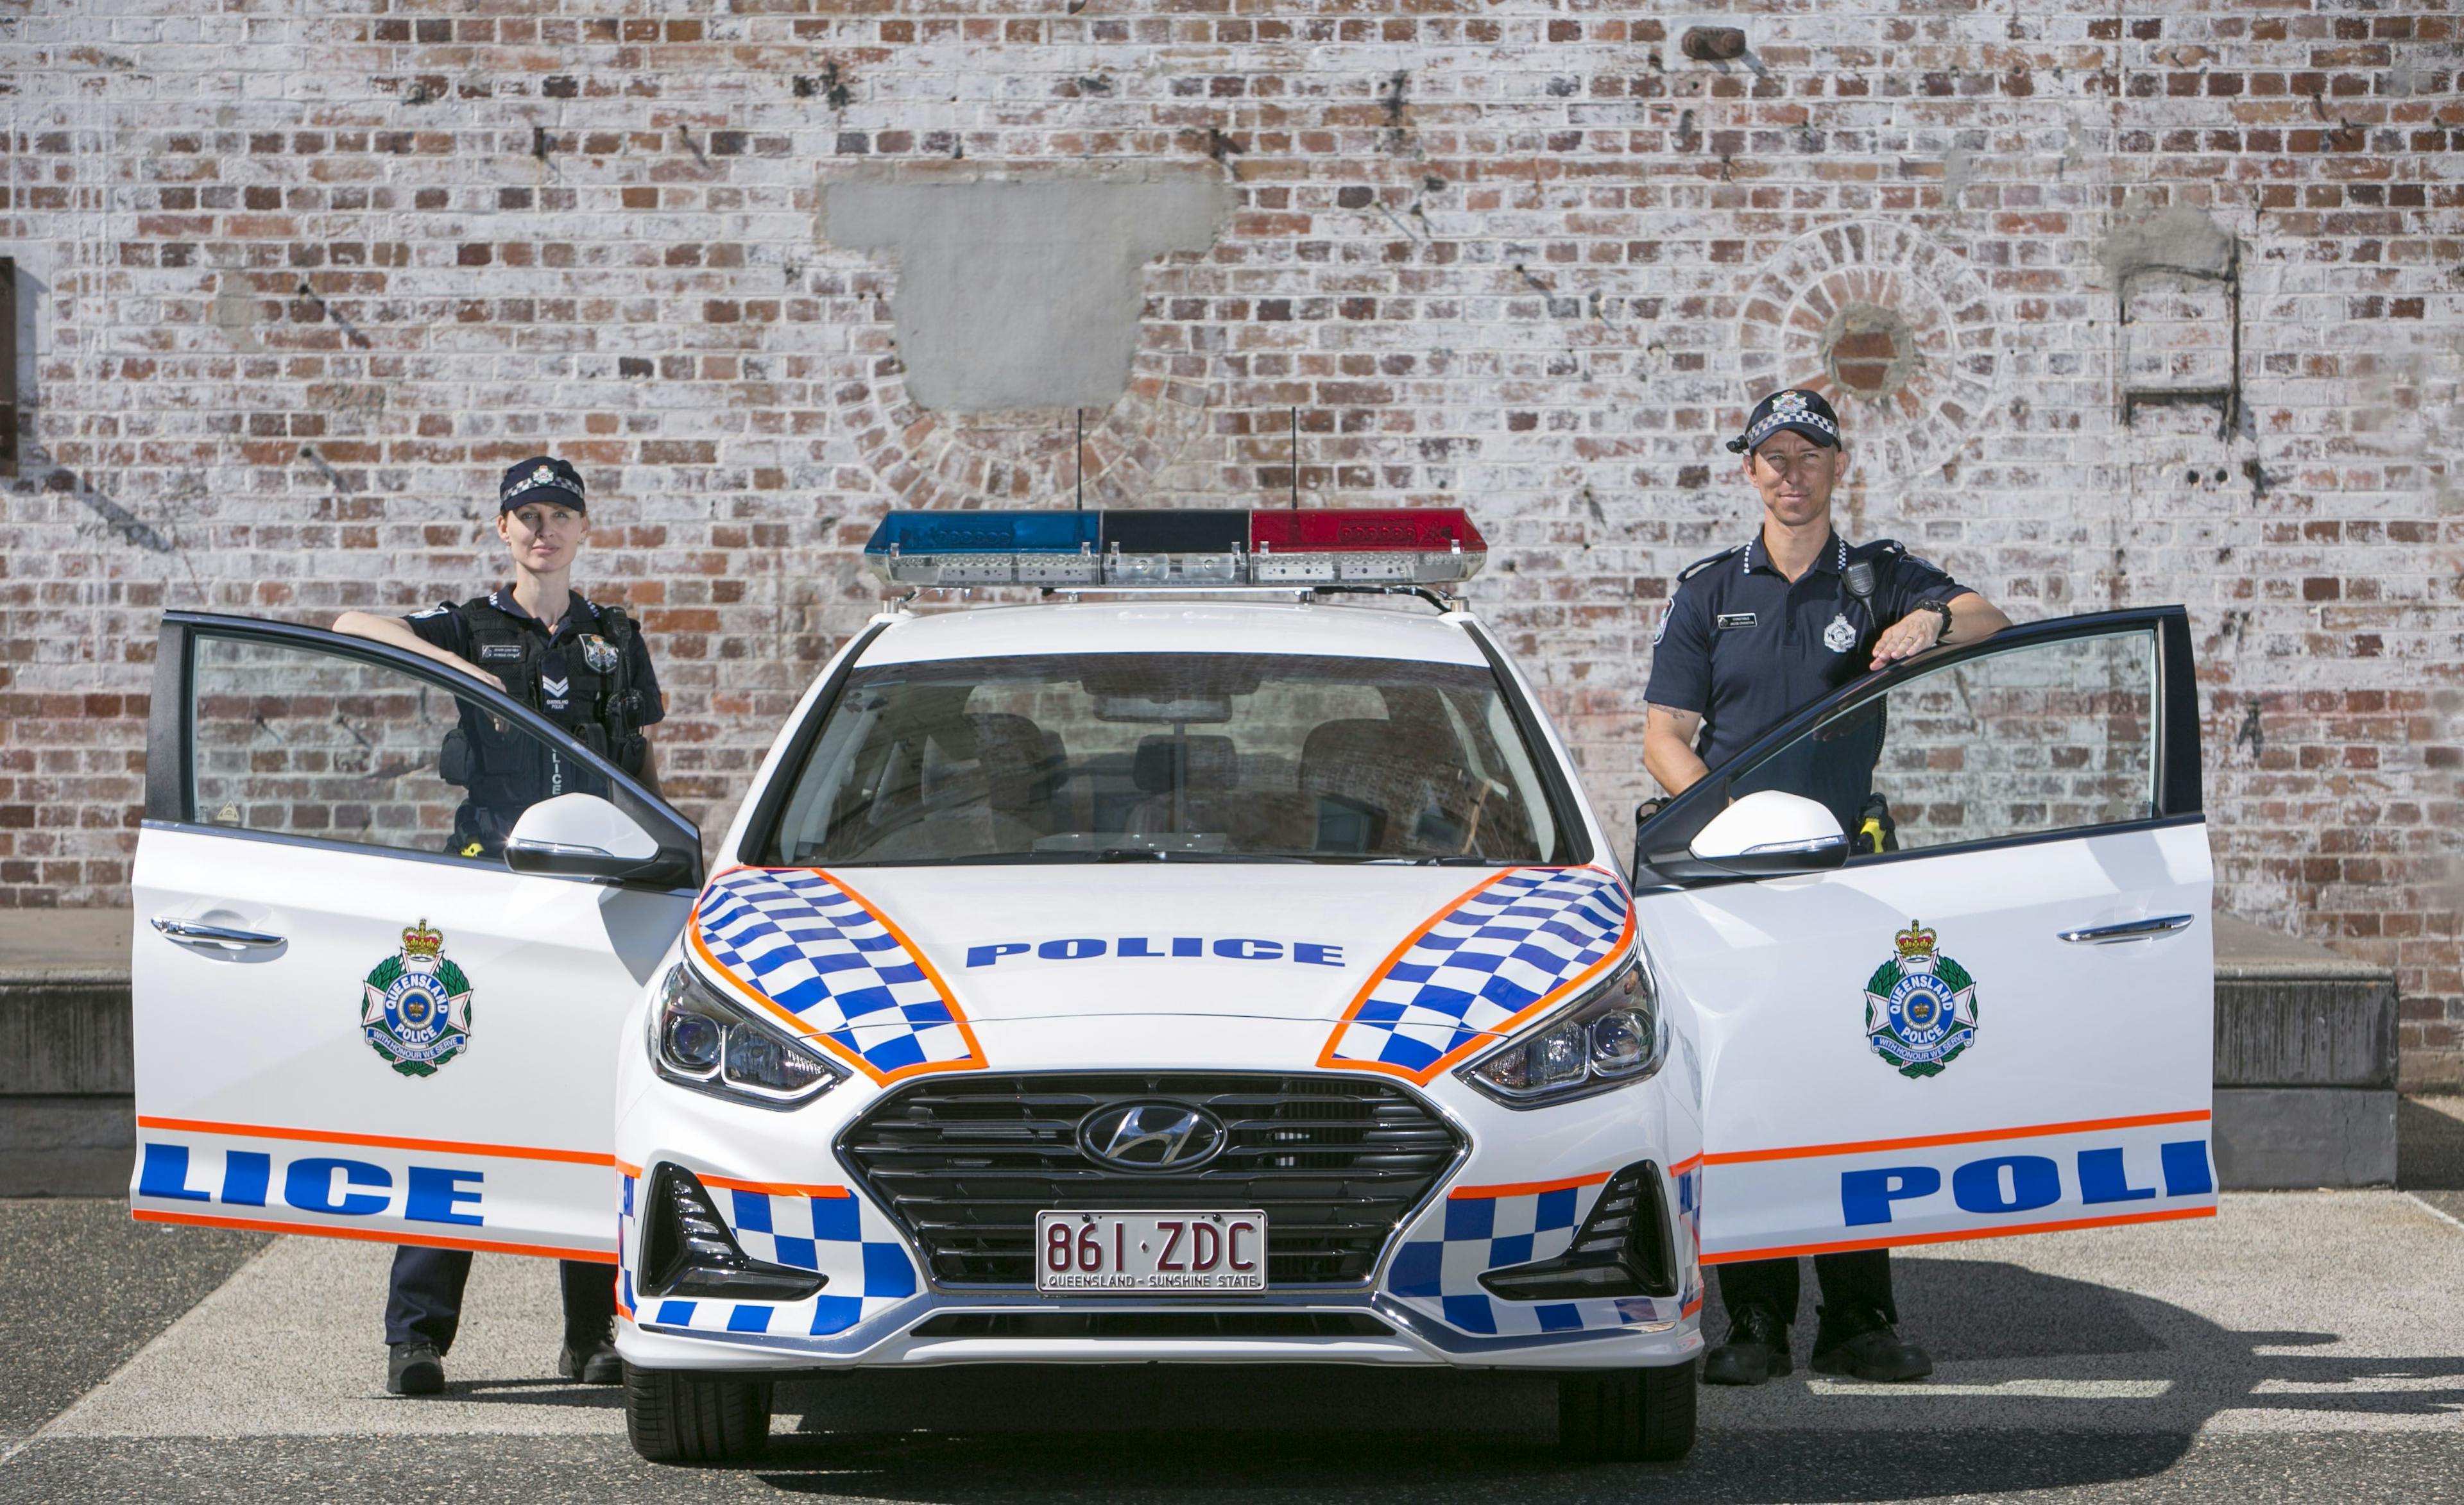 Queensland: racist one day, police state the next